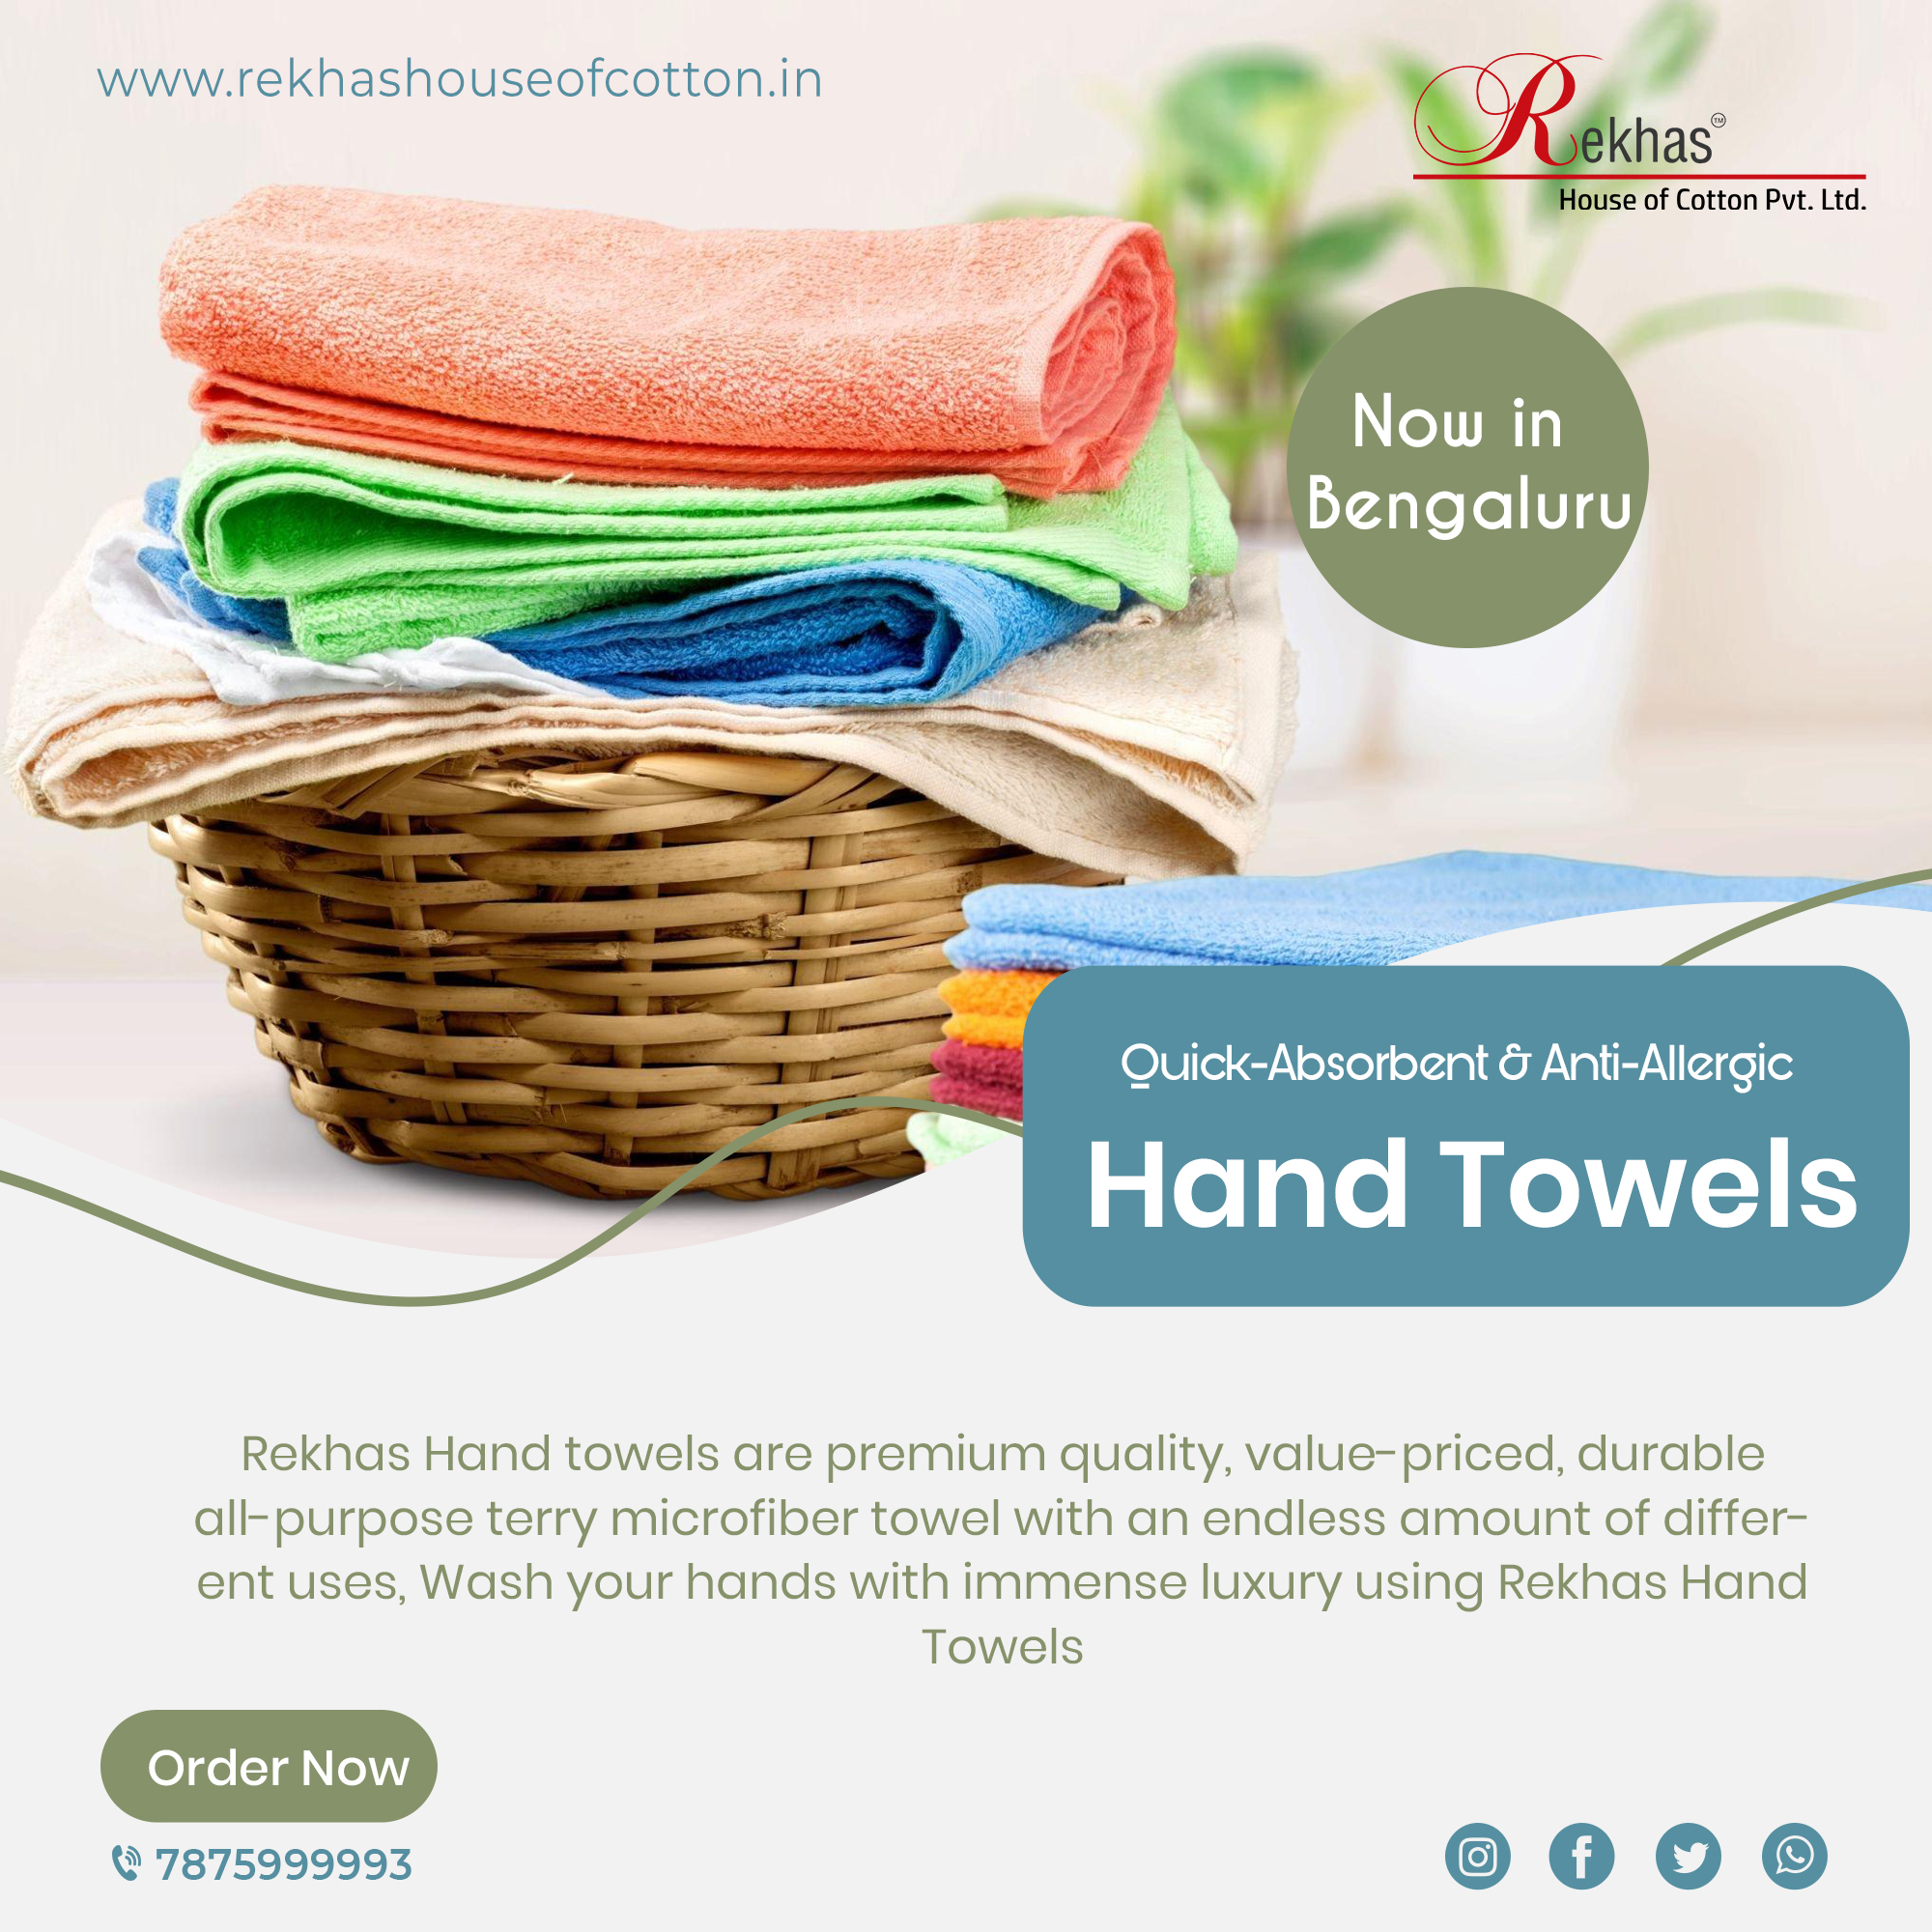 Get the best of Hand Towels in Bengaluru from Rekhas house of Cotton.